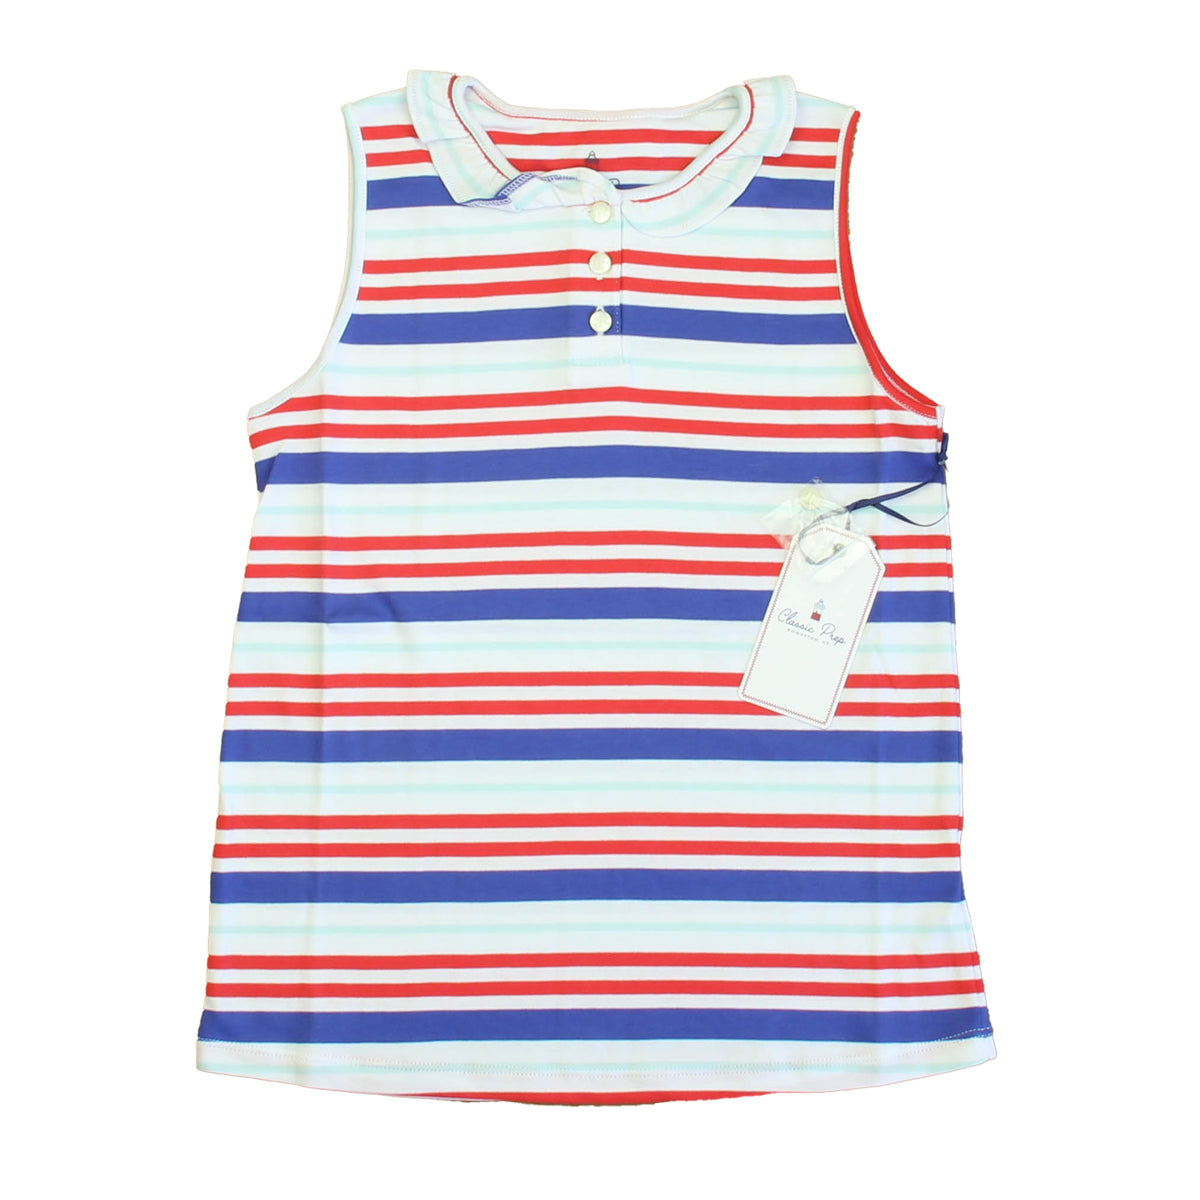 New with Tags: Bittersweet Multistripe Top size: 6-14 Years -- FINAL SALE